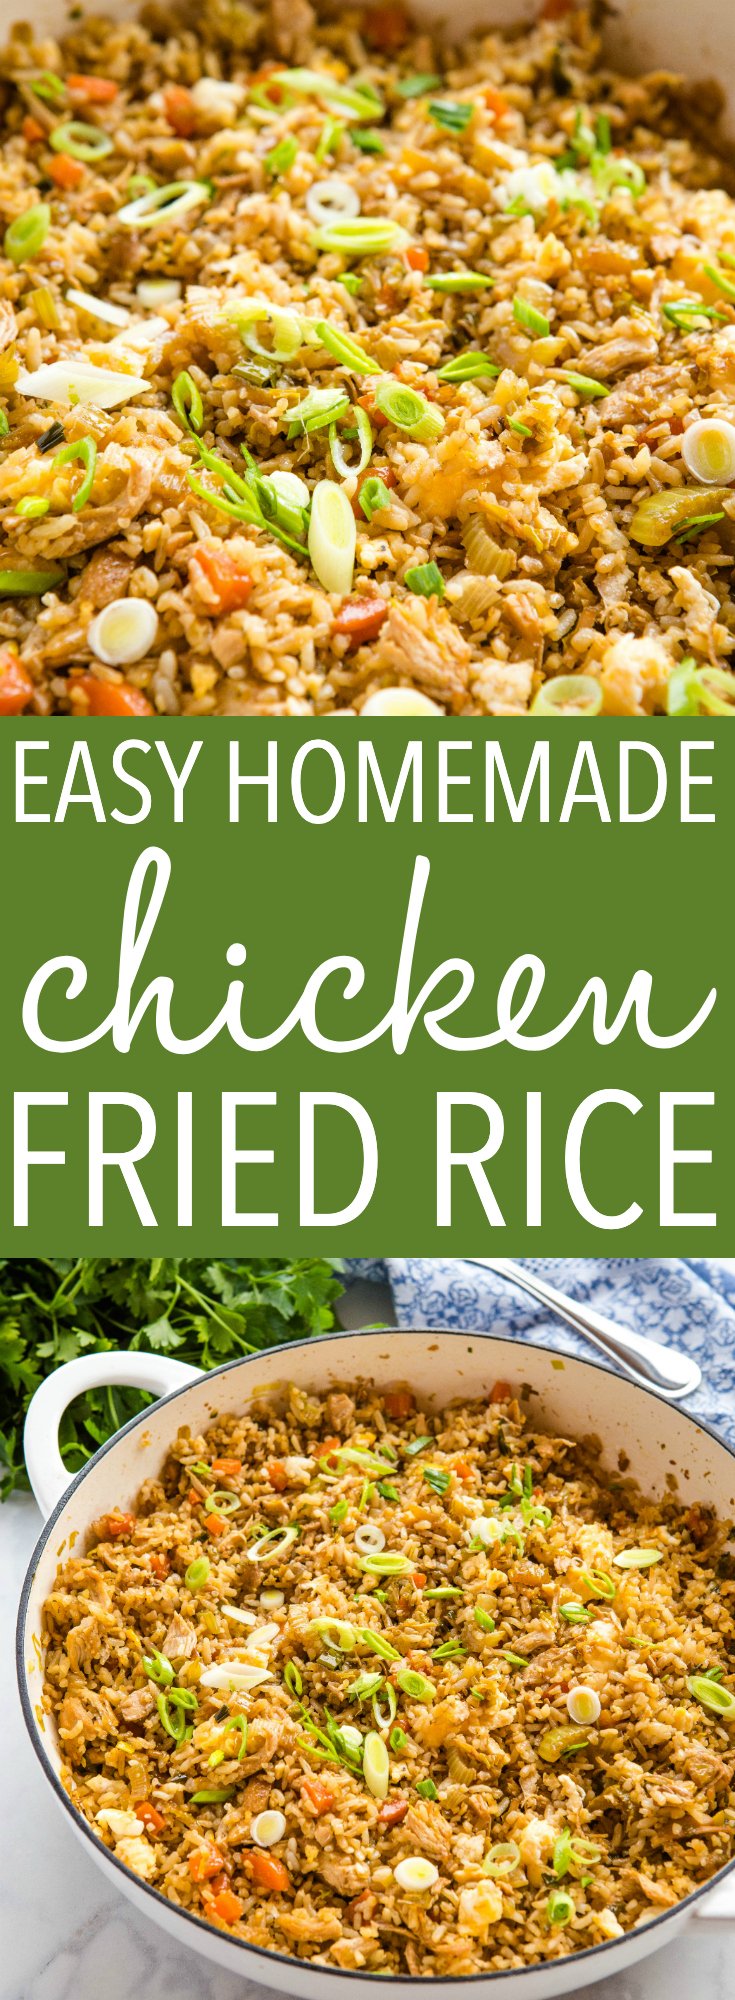 This Chicken Fried Rice recipe makes the perfect simple weeknight meal . Make it with leftover rice, one chicken breast, and whatever veggies you have on hand! It's better than takeout fried rice and it's on the table in 20 minutes! Recipe from thebusybaker.ca! #rice #friedrice #chinesefood #takeout #copycat #weeknightmeal #family #meal #dinner via @busybakerblog